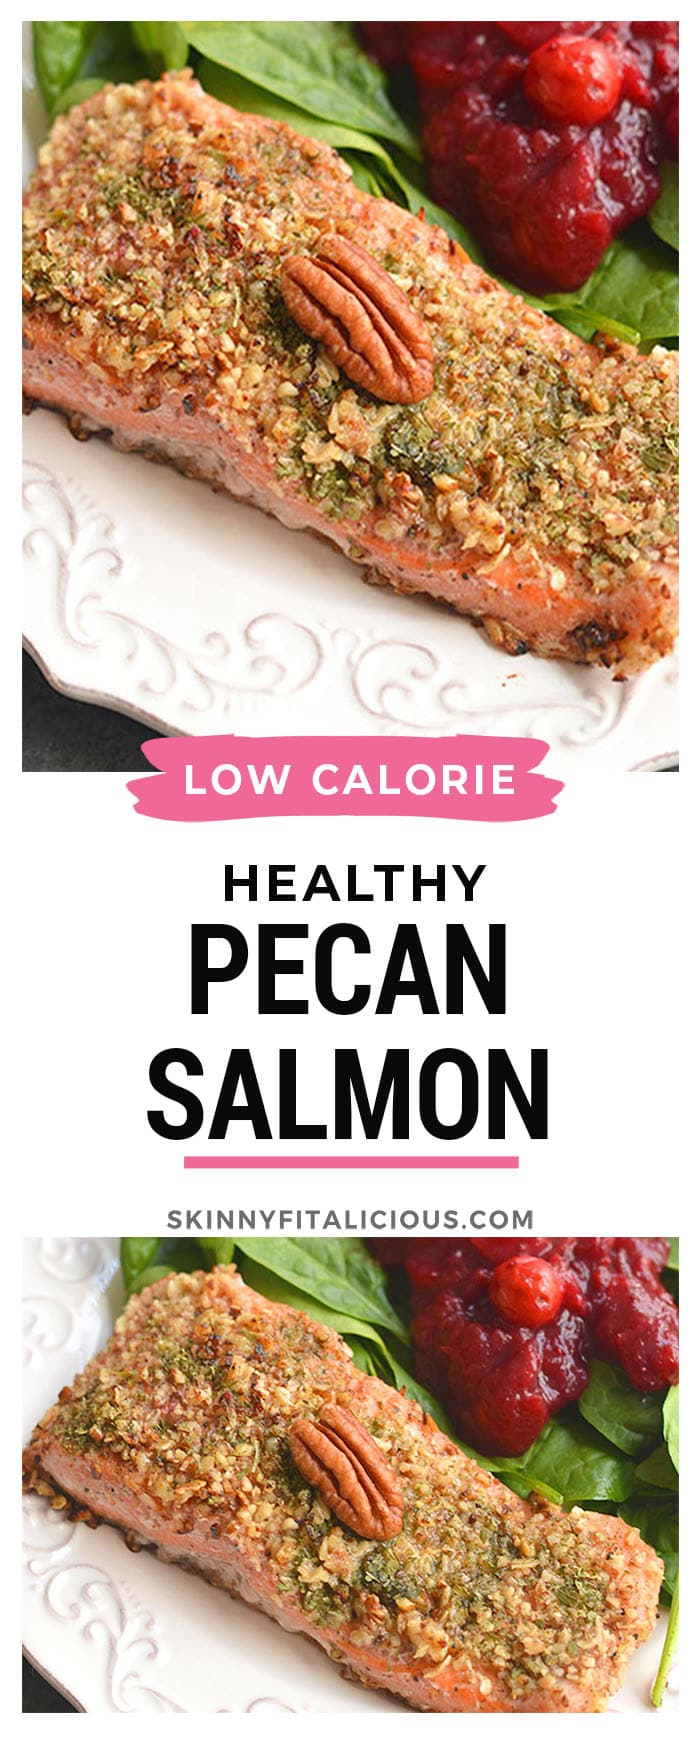 Pecan Oat Salmon! Salmon breaded in a pecan-oat-parsley mixture and sautéed in one pan. An easy dinner, ready in 20 minutes and packed with nutrients! Gluten Free + Low Calorie